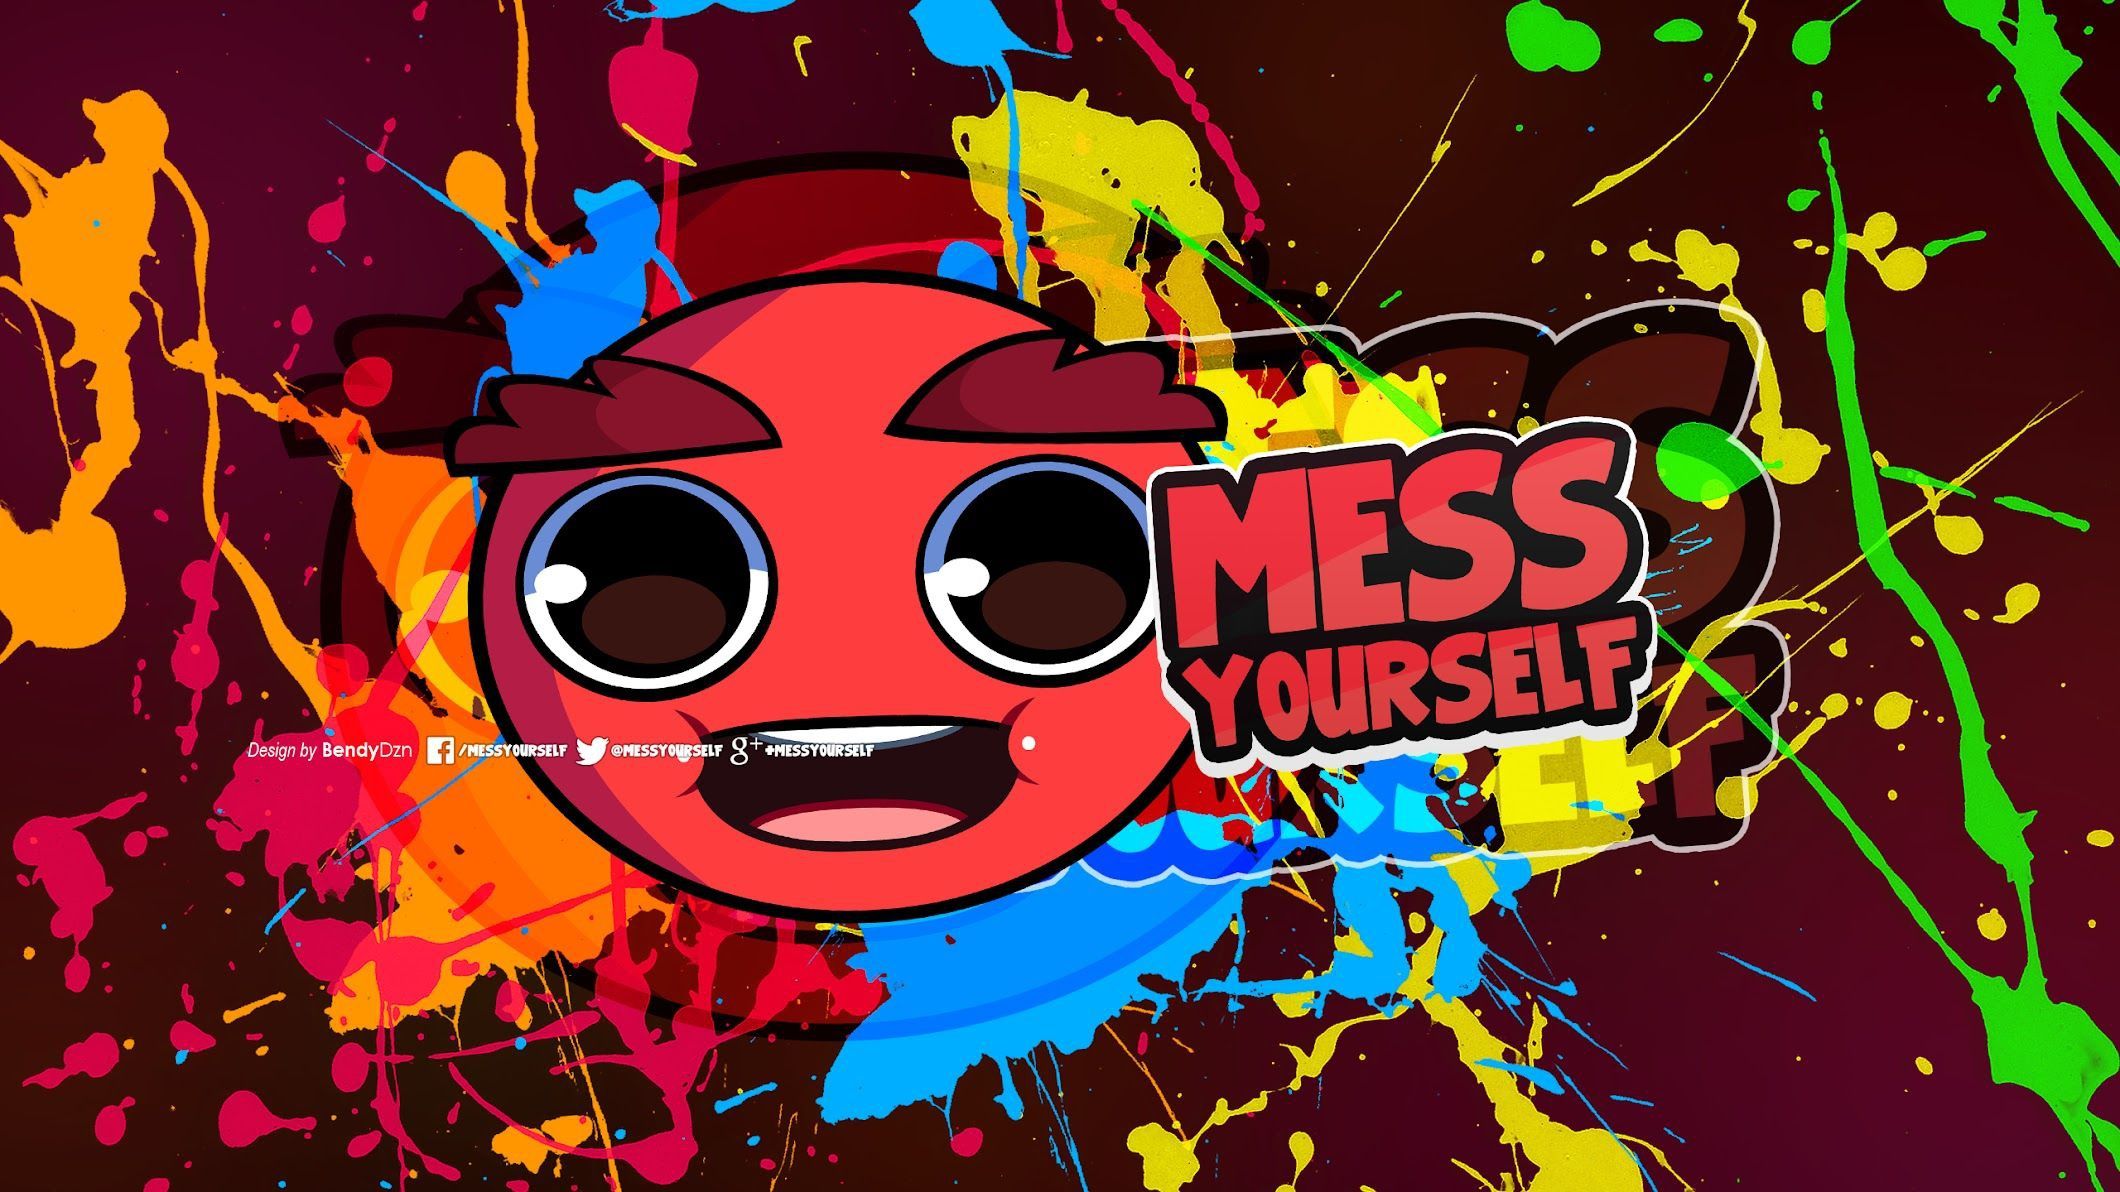 Messyourself Logo Wallpapers